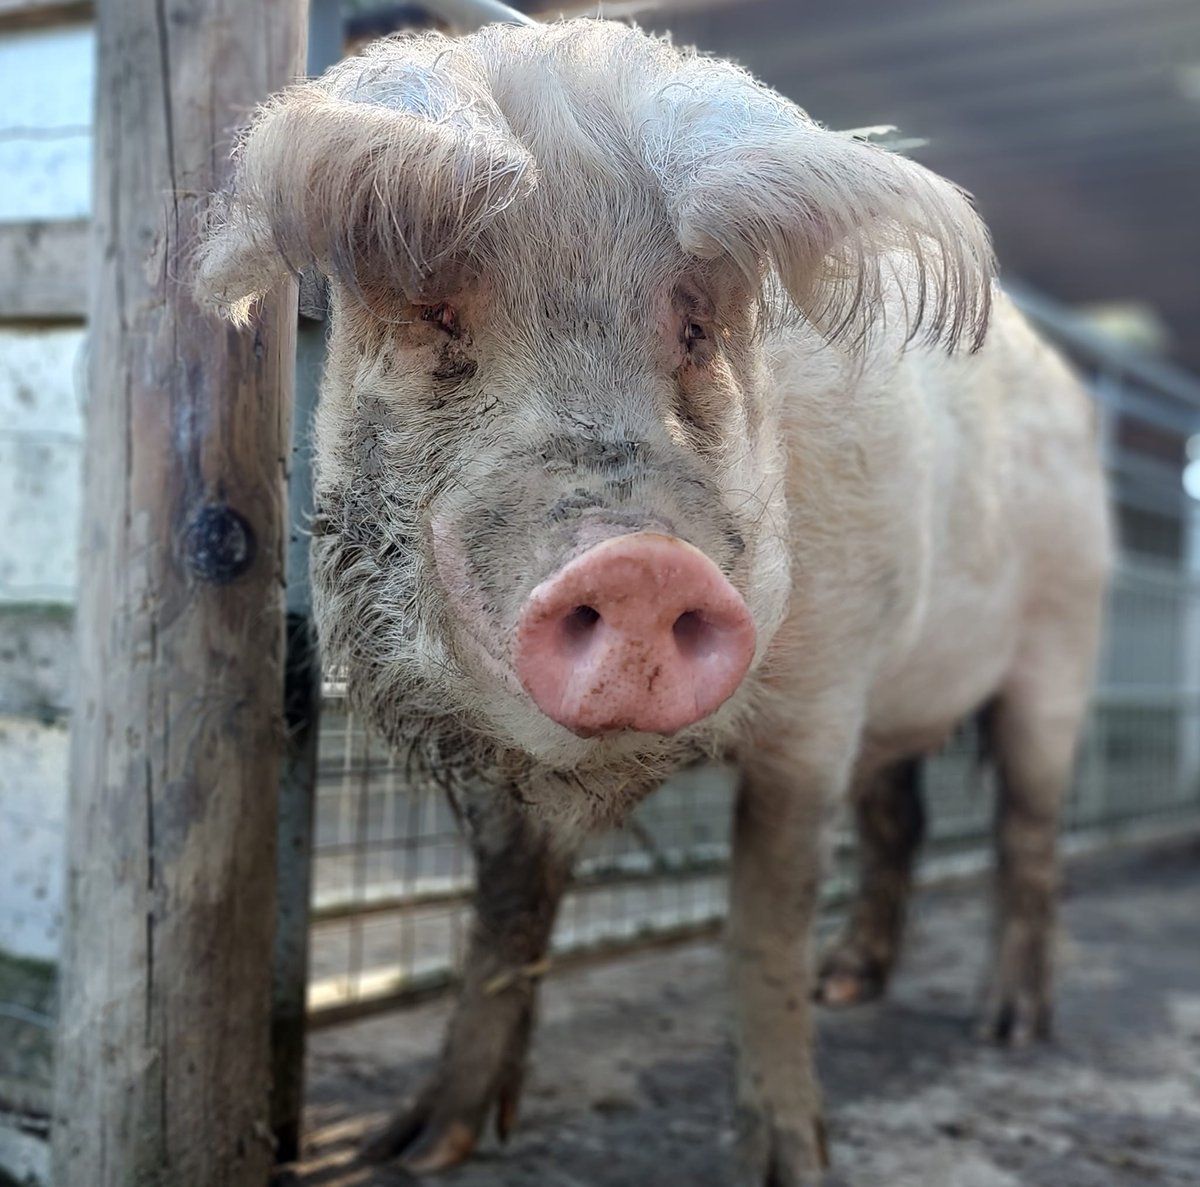 Pigoneer Pig Of The Day Brian! WARNING... Extreme Handsomeness alert. They don't come much more handsome than Brian with the big fluffy ears and big pink snout🐽 In between swooning, join the Pigoneers, help support him for as little as £2.50 a month⬇️ globalvegancrowdfunder.org/pigoneer-2000-…